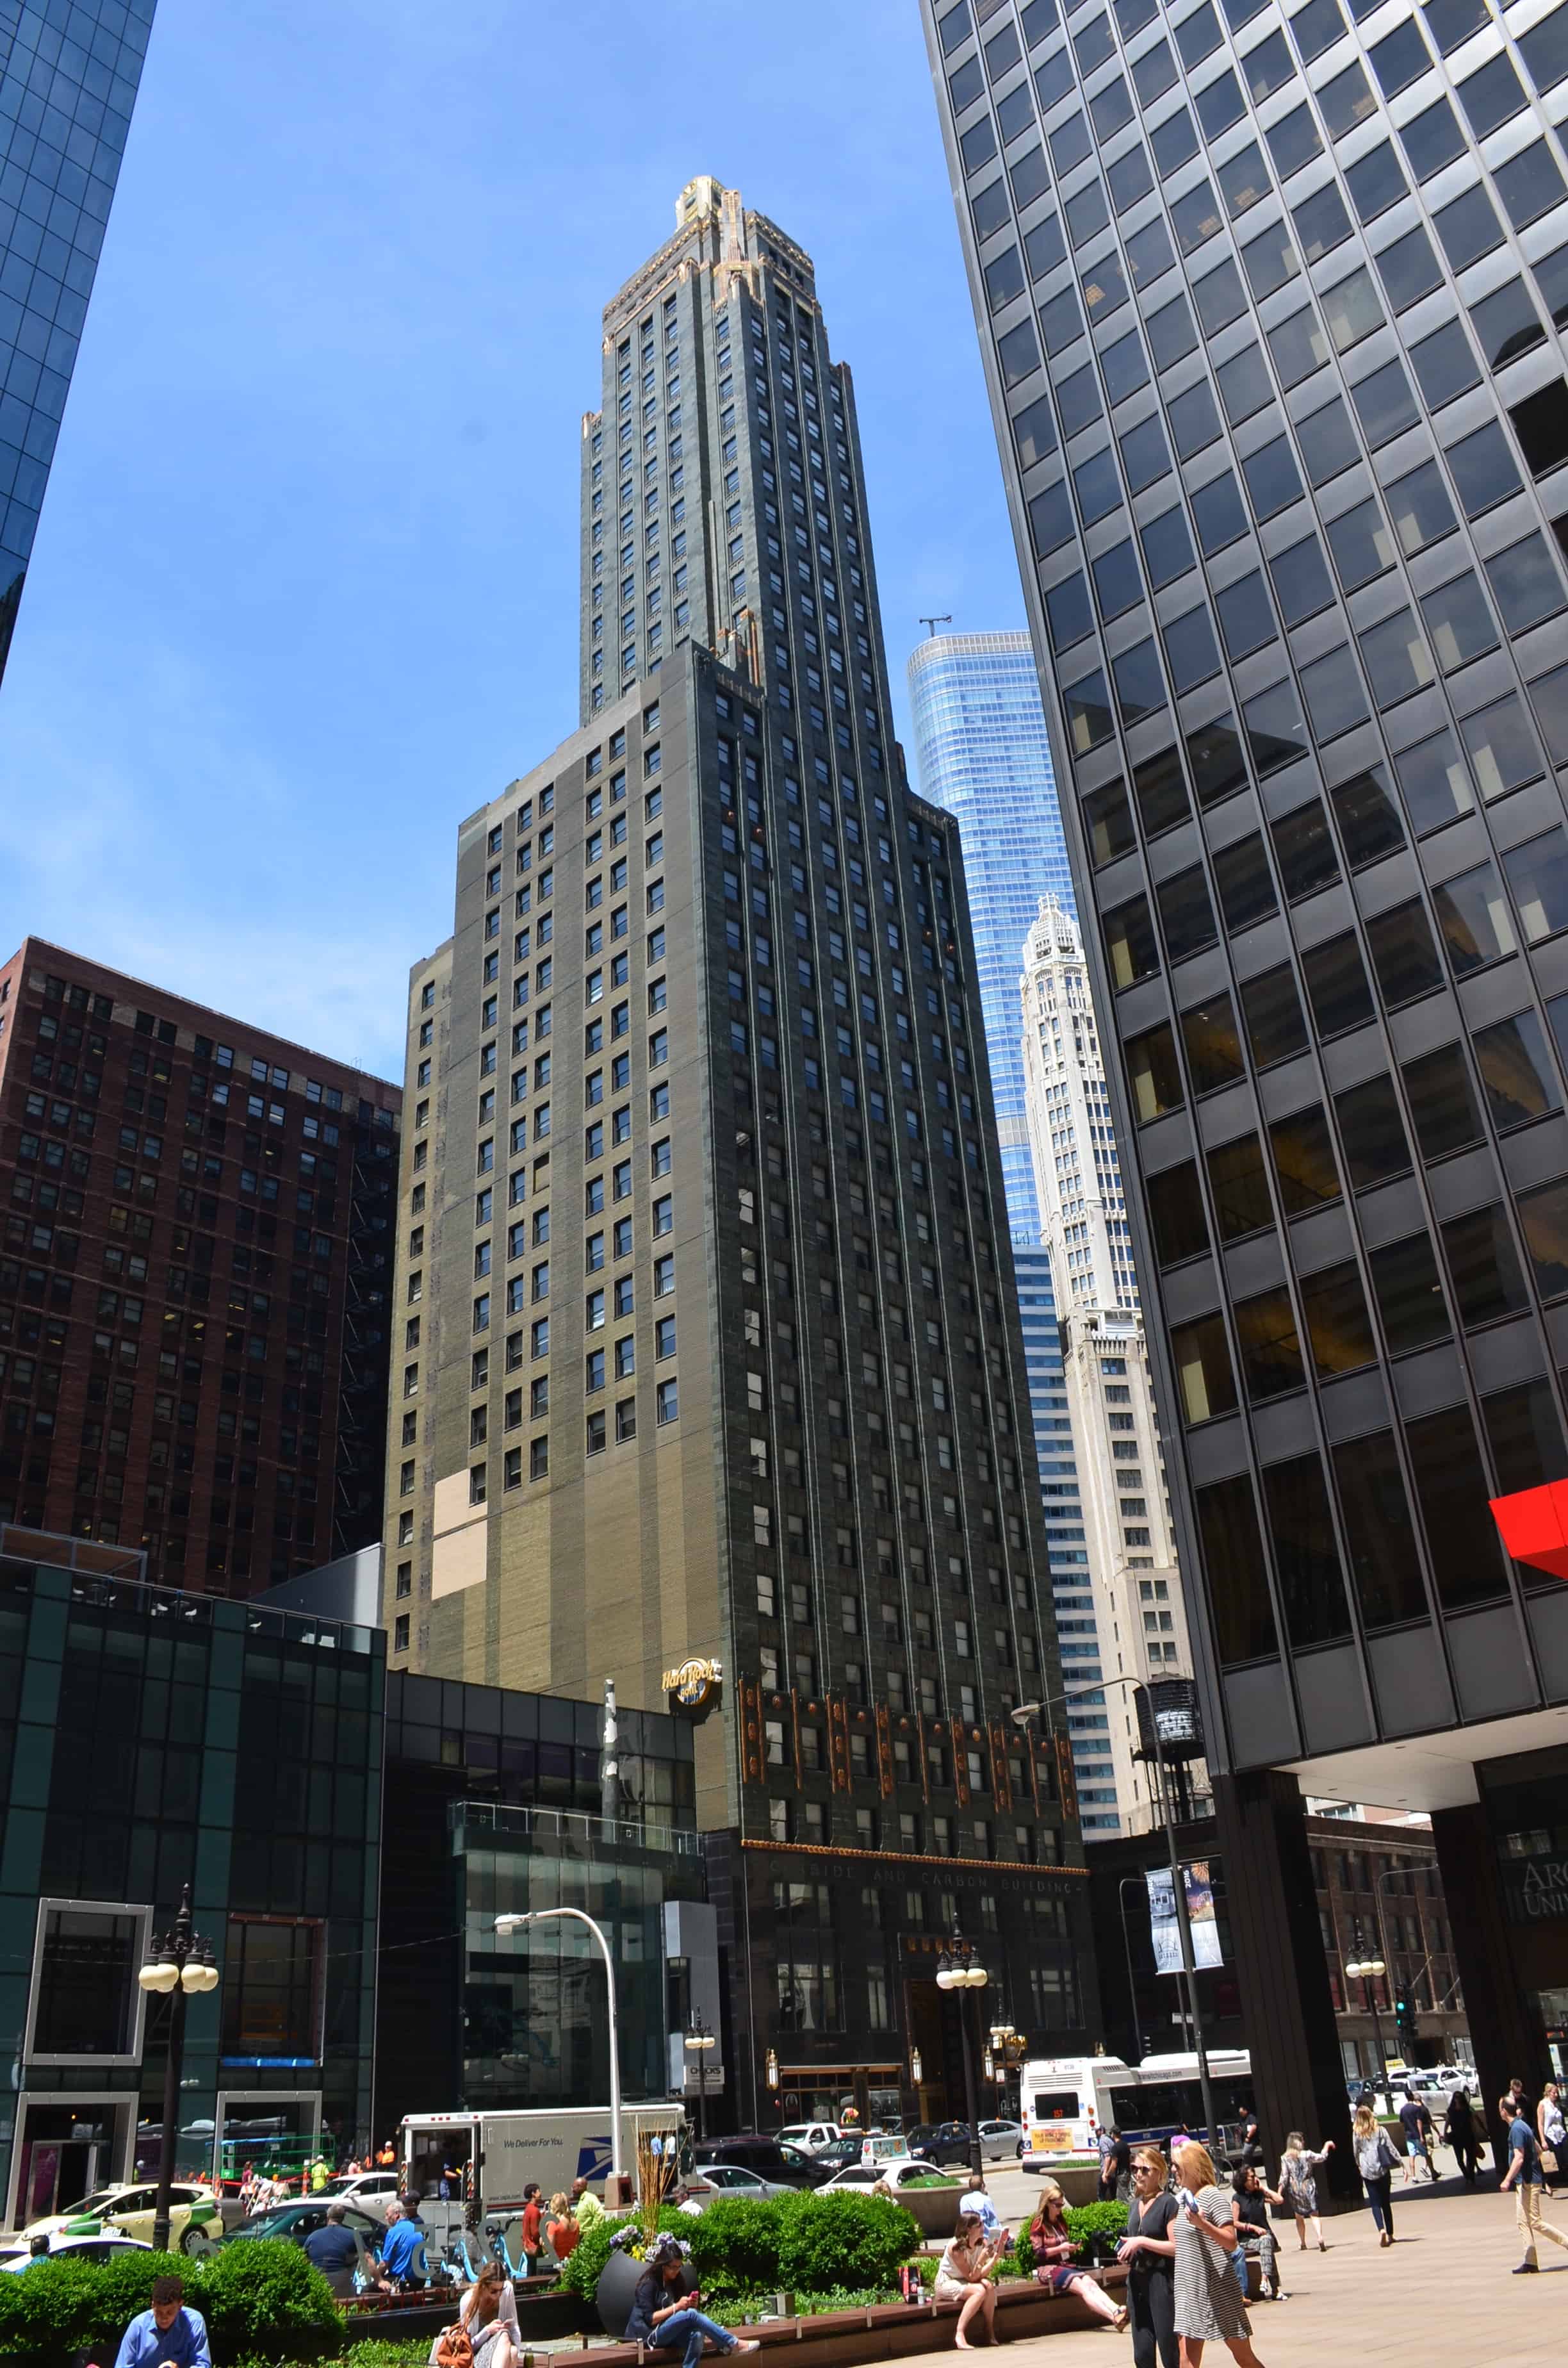 Carbide and Carbon Building in Chicago, Illinois